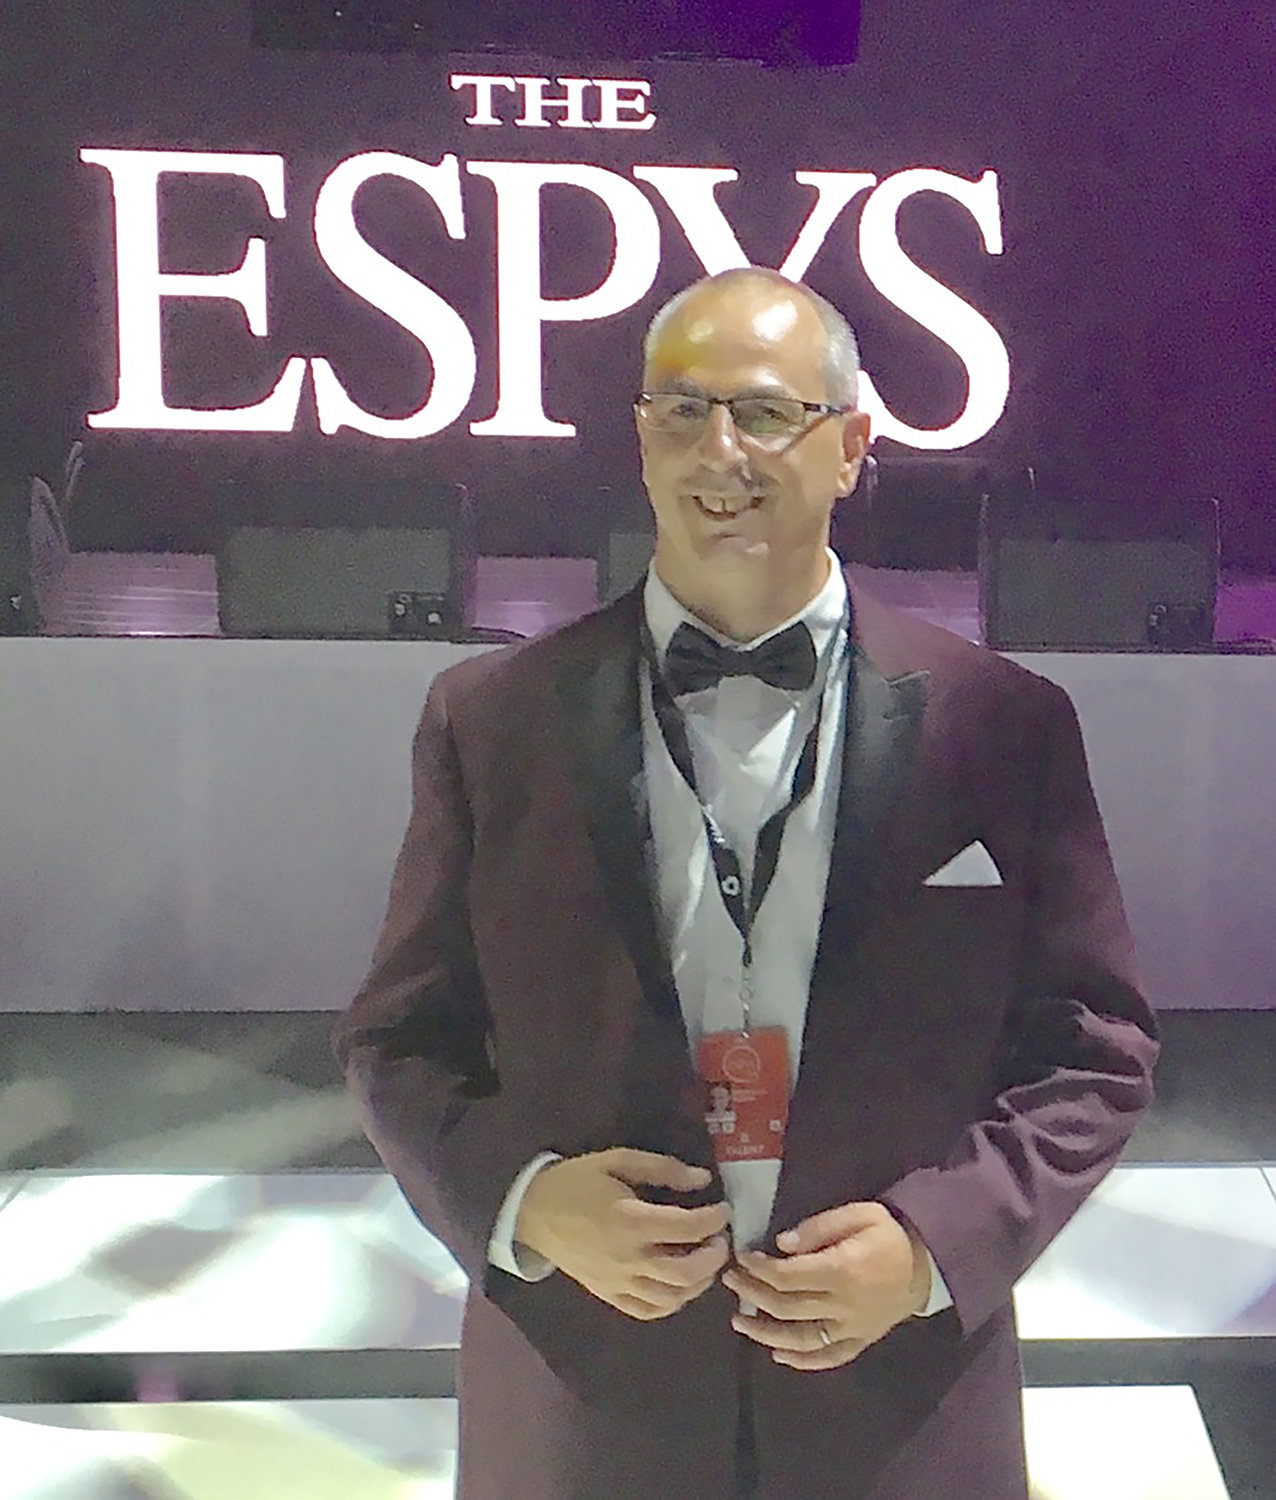 Nick Marra poses at the ESPY Awards ceremony in 2017 in Los Angeles. The Syracuse-based comedian was invited to the sports awards show to share some of his own act.